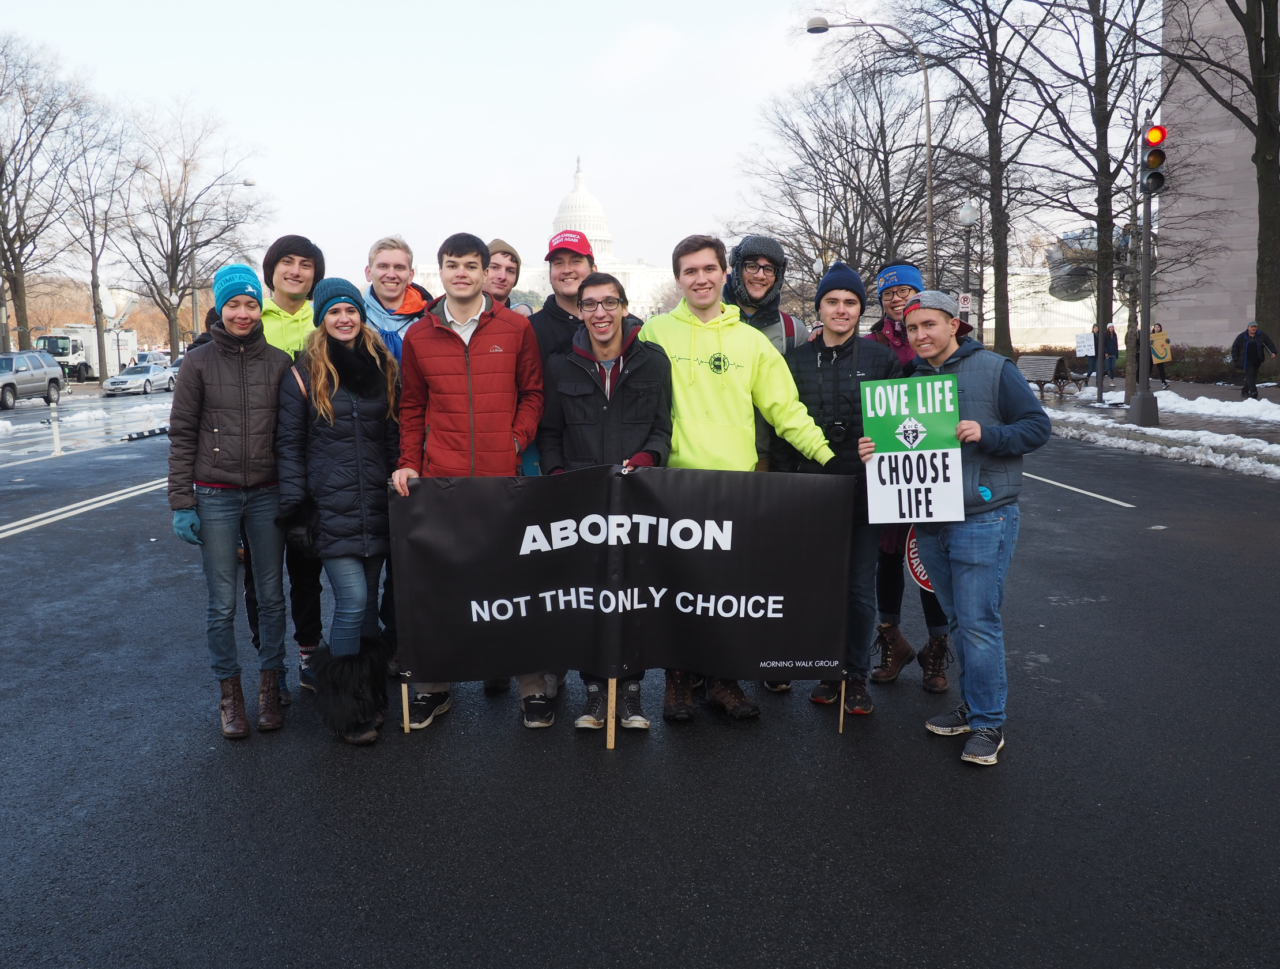 An Update from Morning Walk: Looking Forward to the March for Life 2020